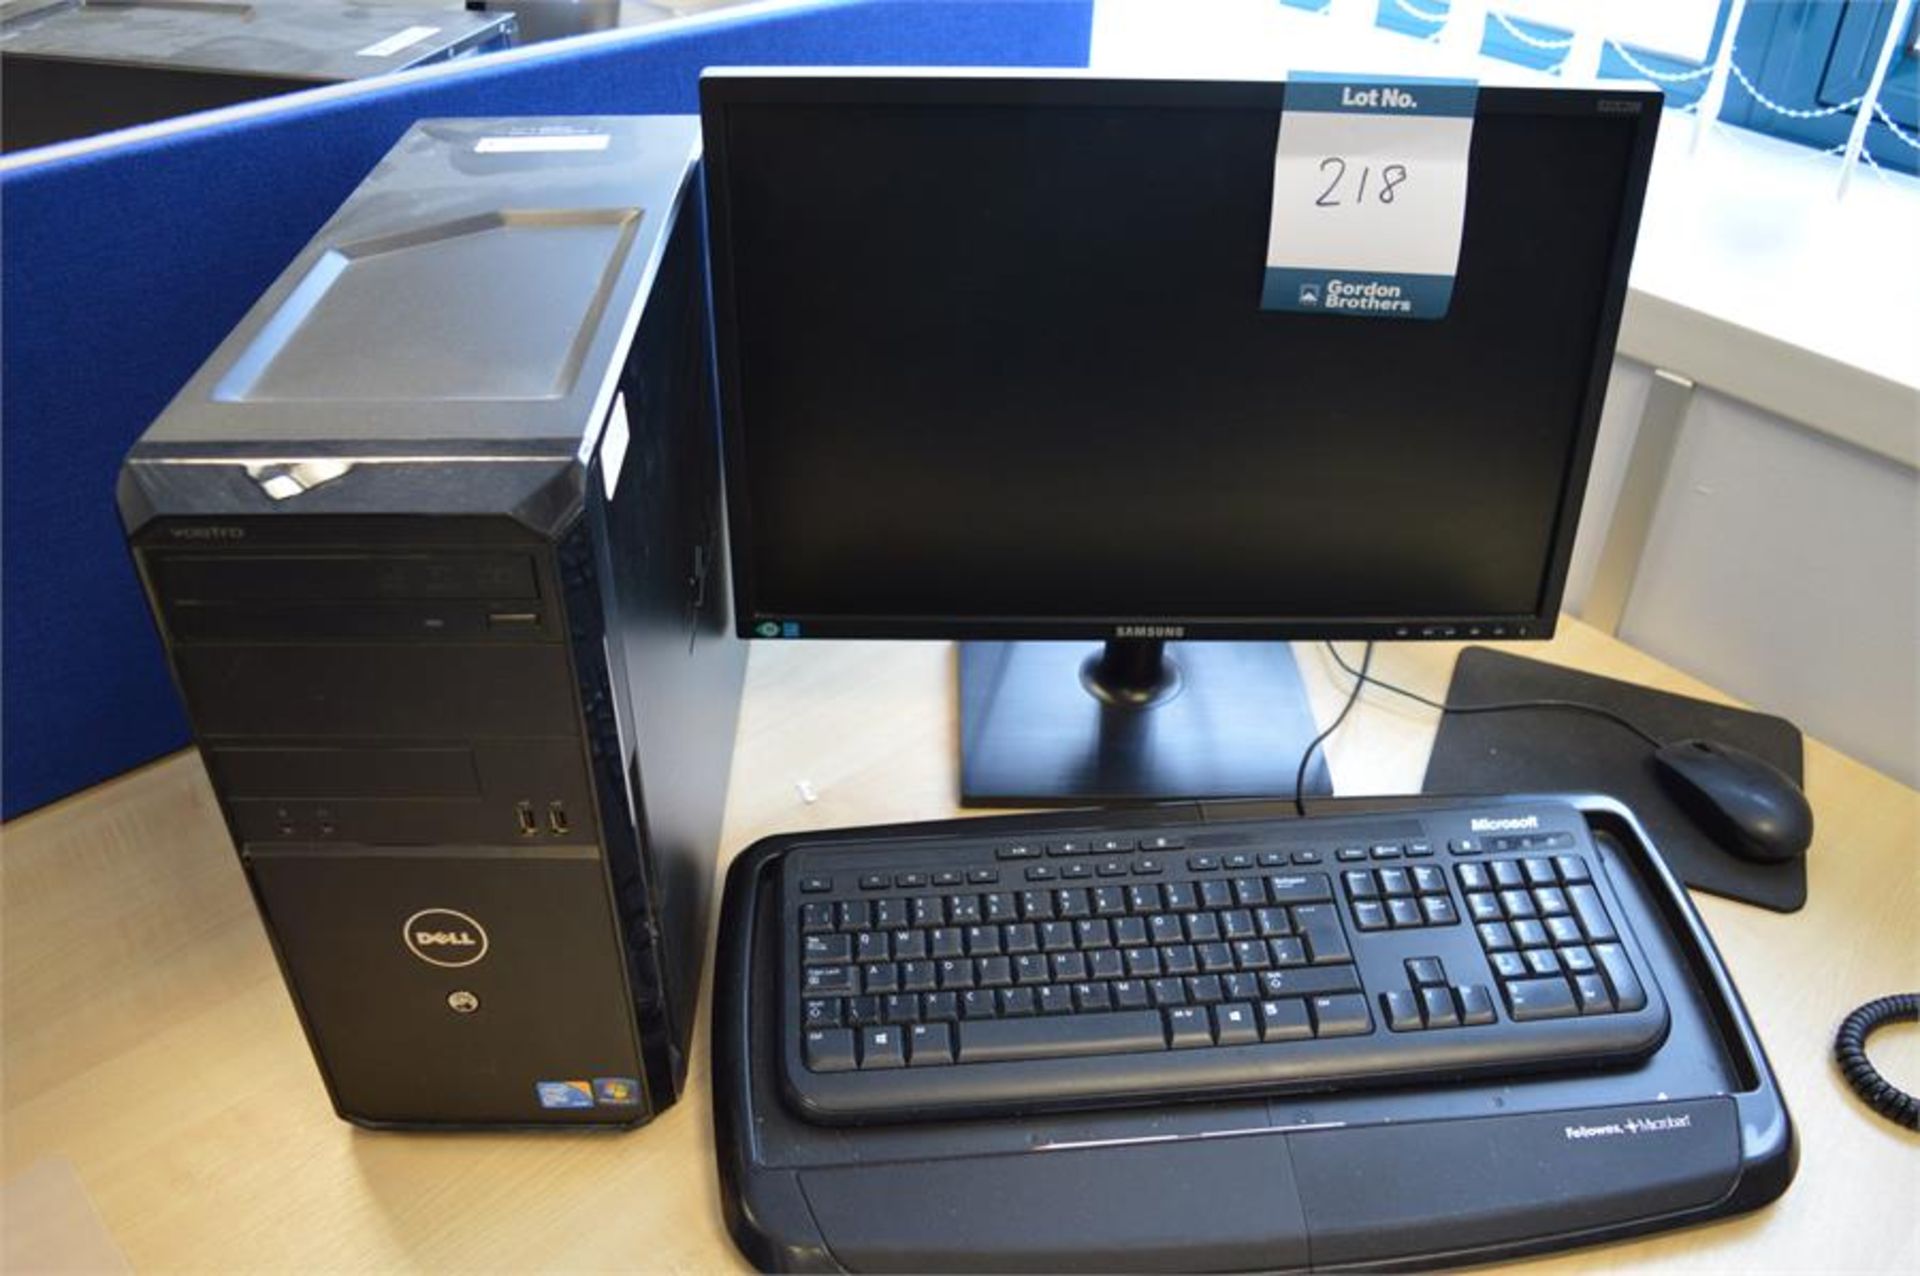 Dell, Vostro Core 2 Duo PC with Samsung flat screen monitor, keyboard and mouse